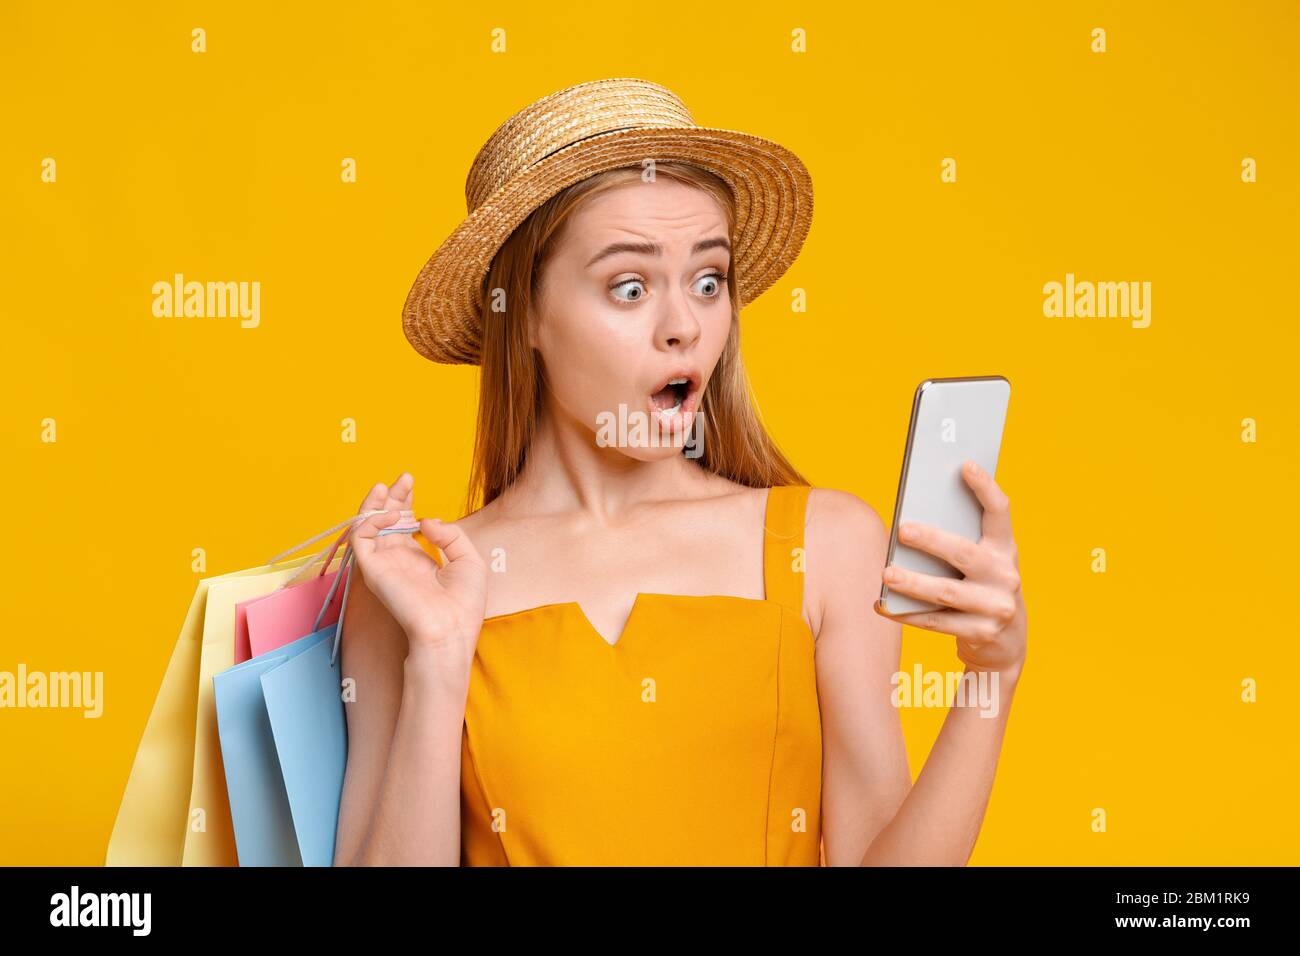 Big Summer Sales. Shocked Millennial Girl Holding Smartphone And Shopping Bags Stock Photo